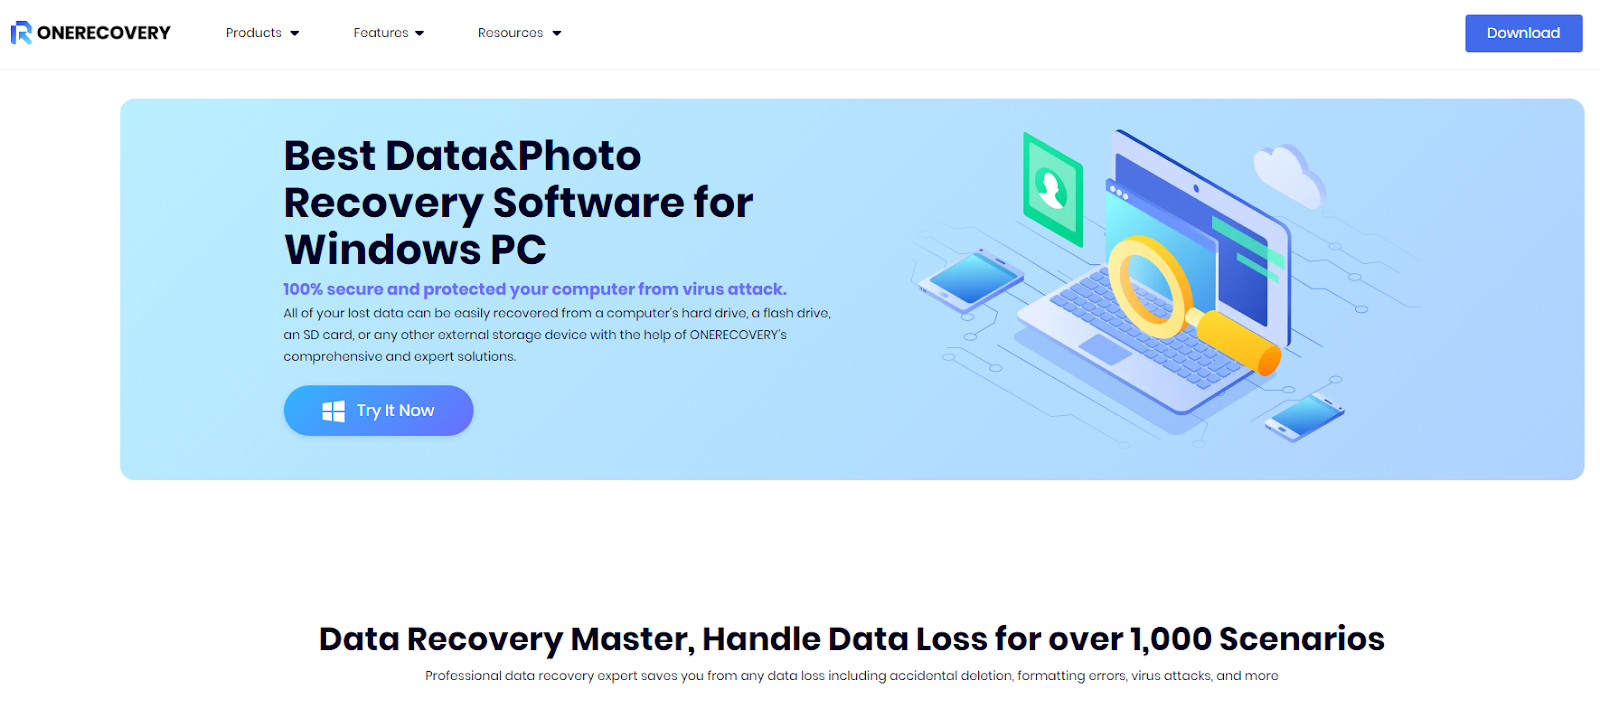 ONERECOVERY Facebook Data Recovery